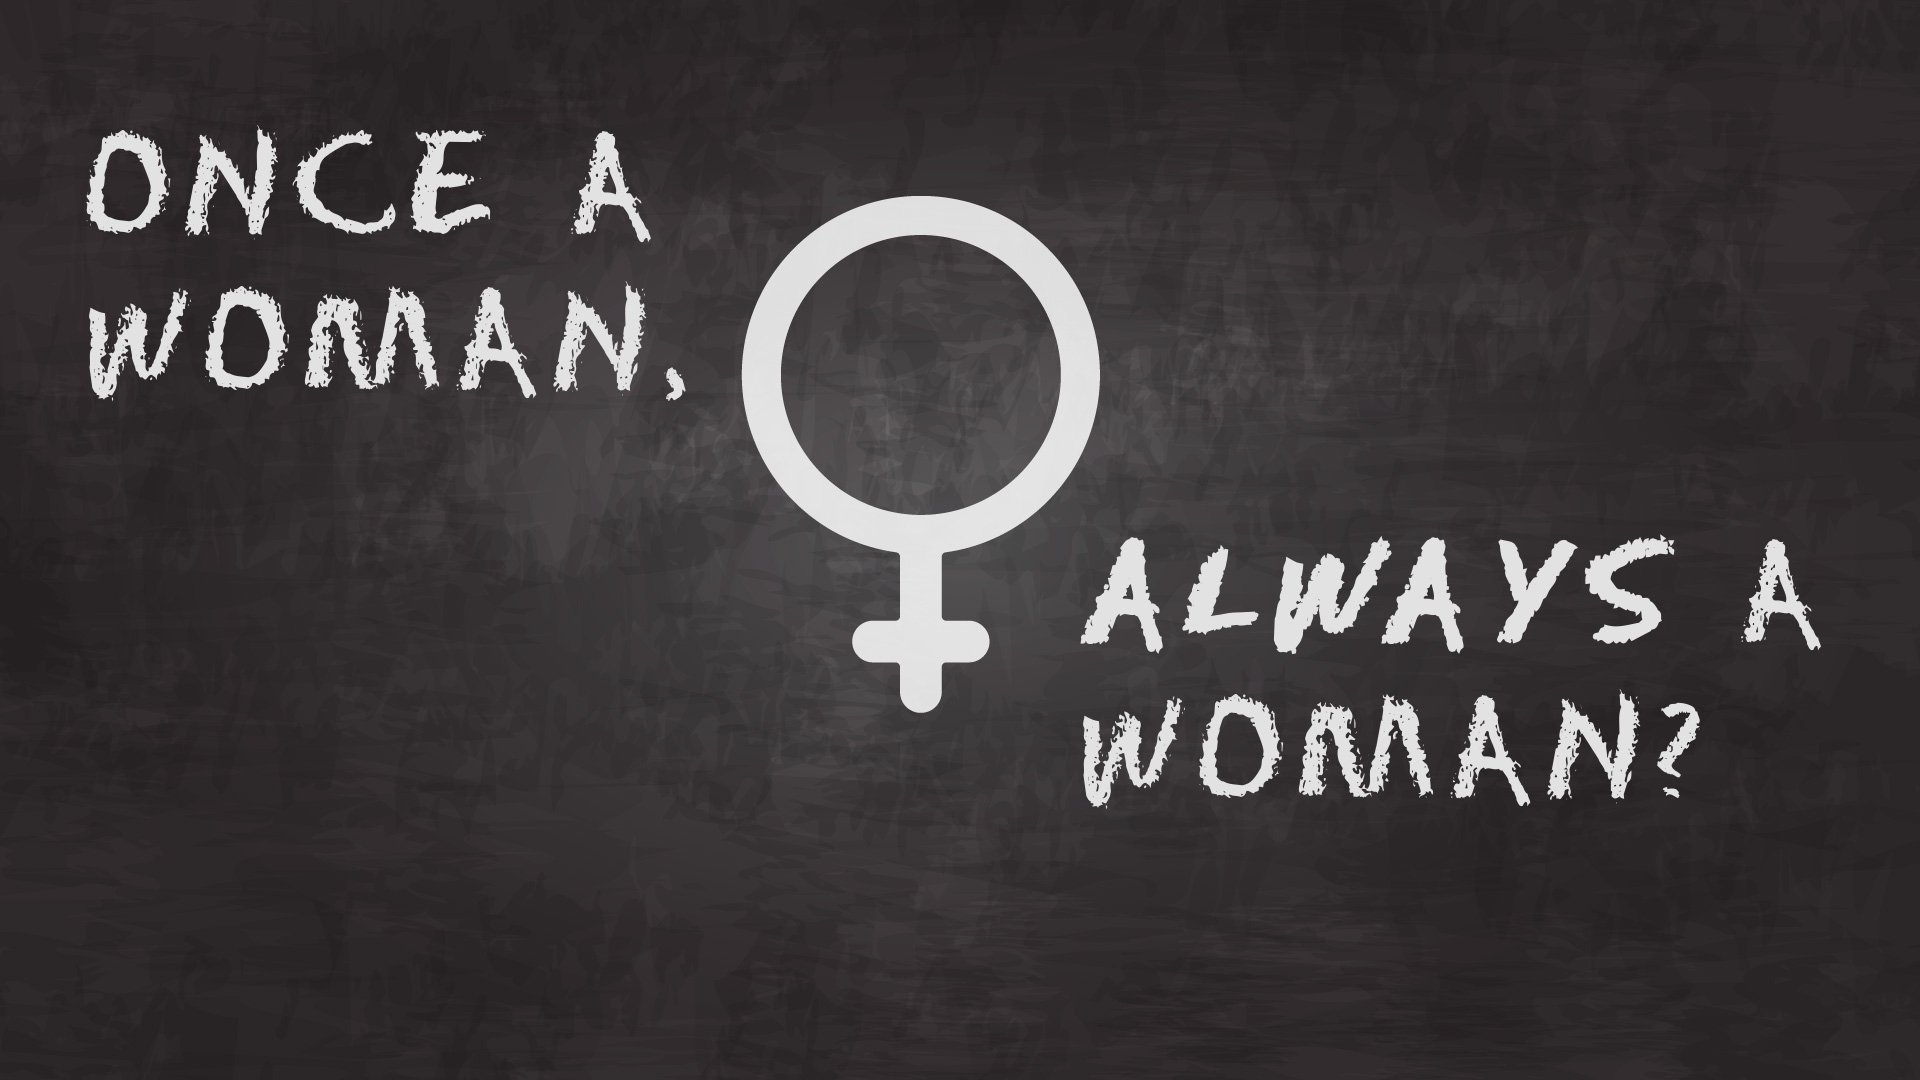 Once a Woman, Always a Woman?